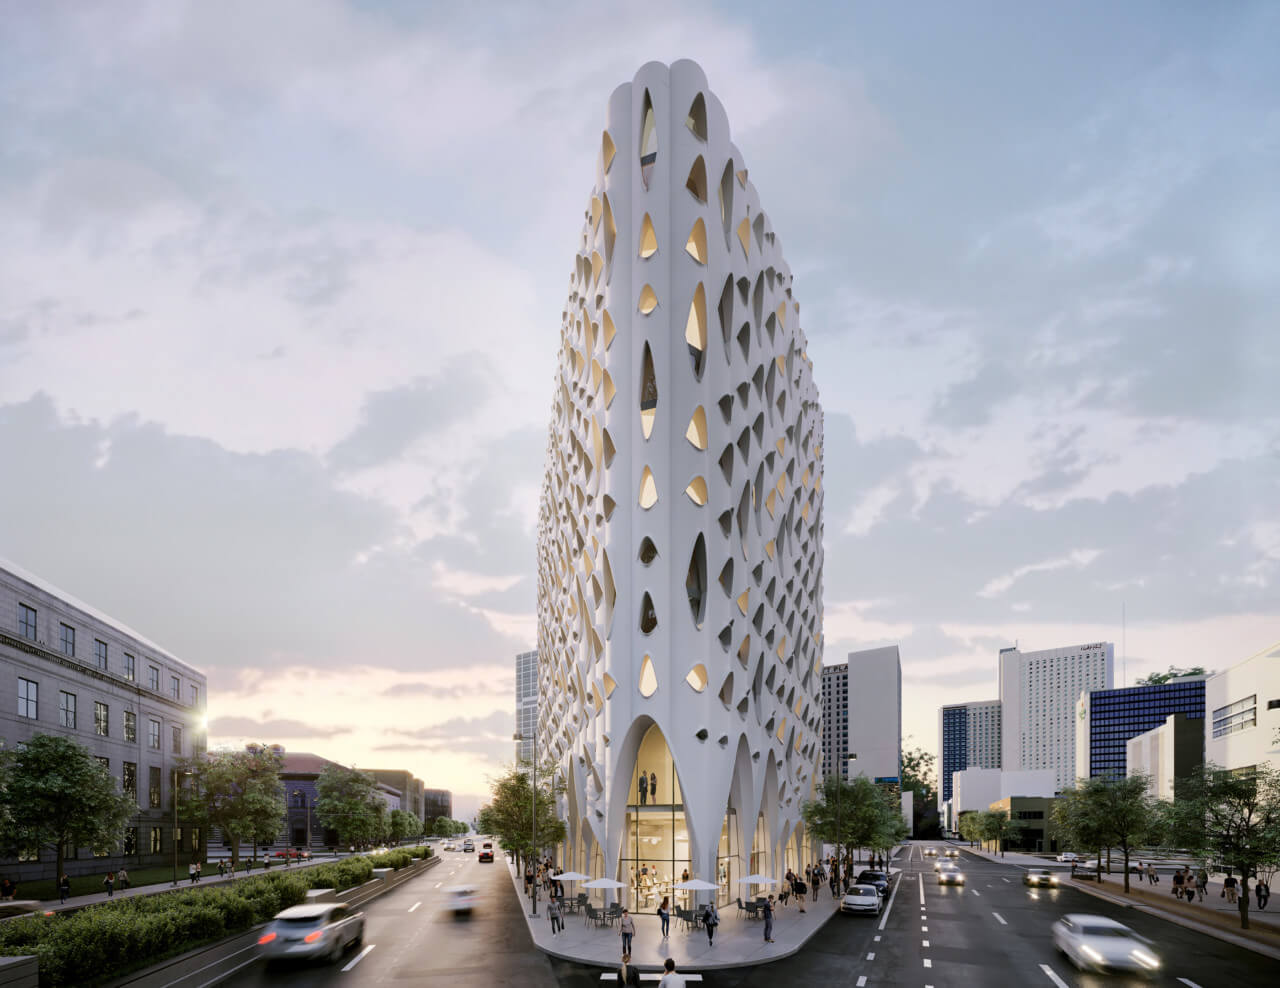 Populus, a 13-story white tower sitting on a triangular lot